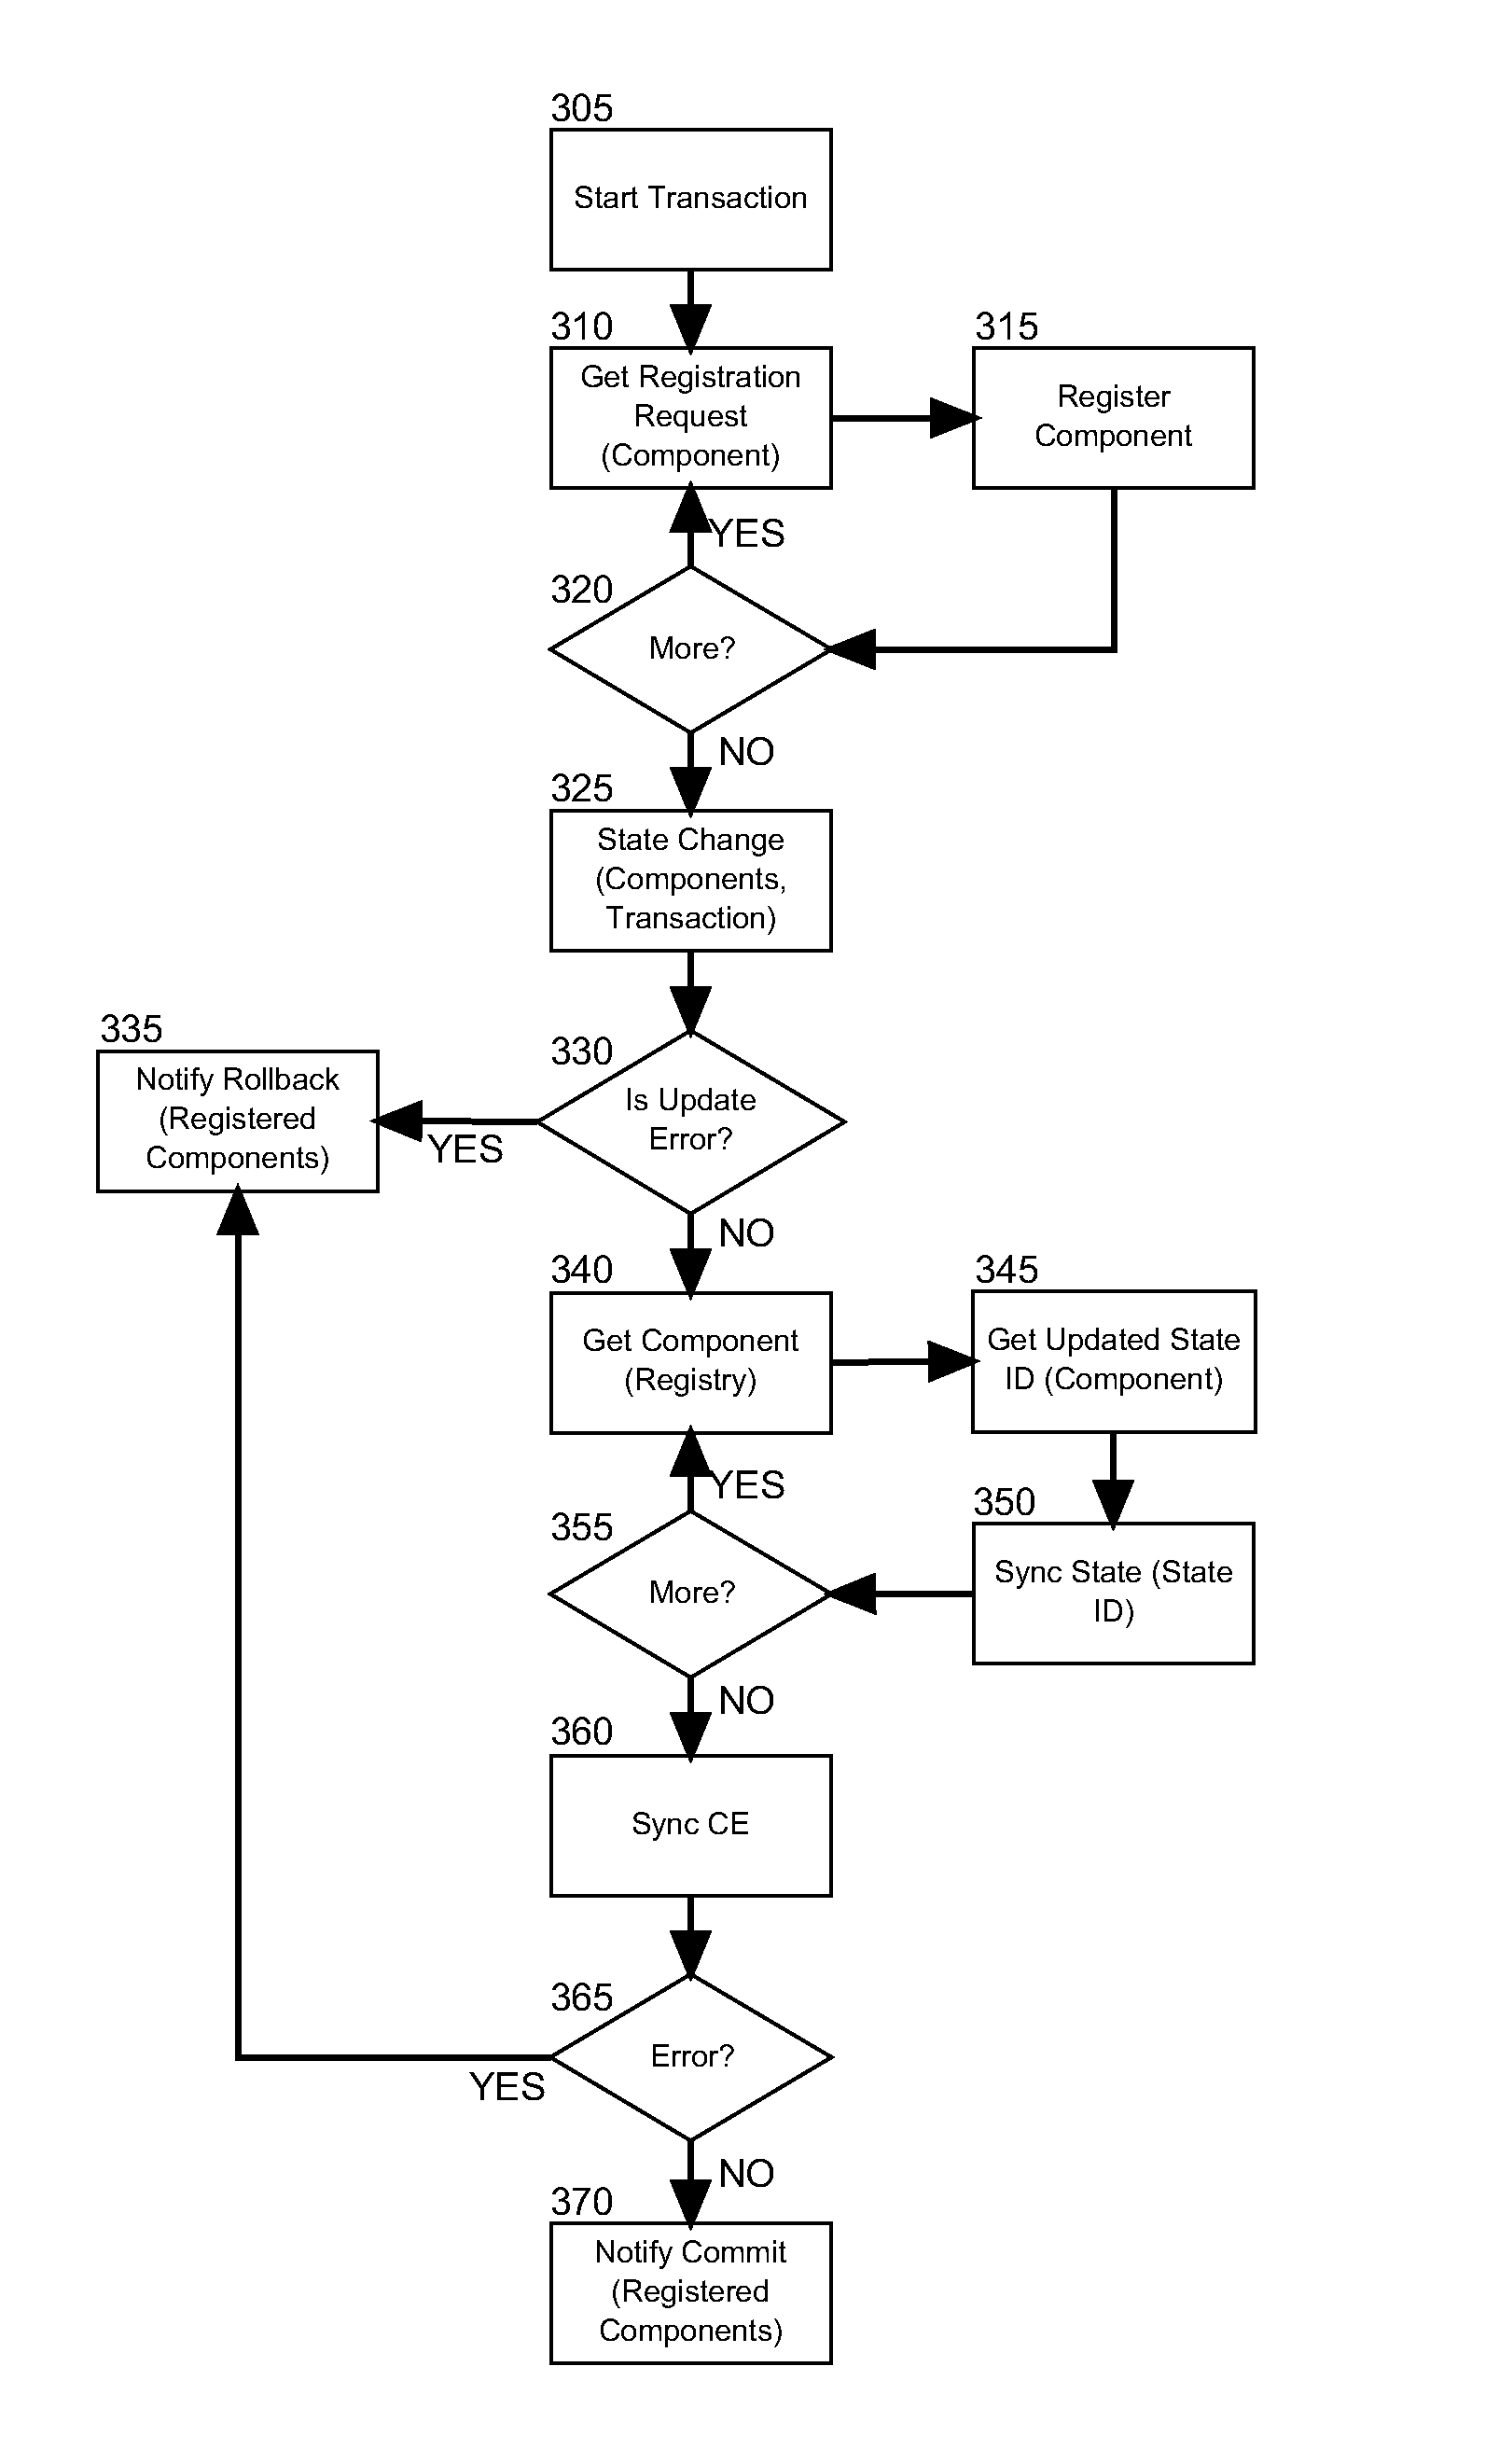 Managing data consistency between loosely coupled components in a distributed computing system